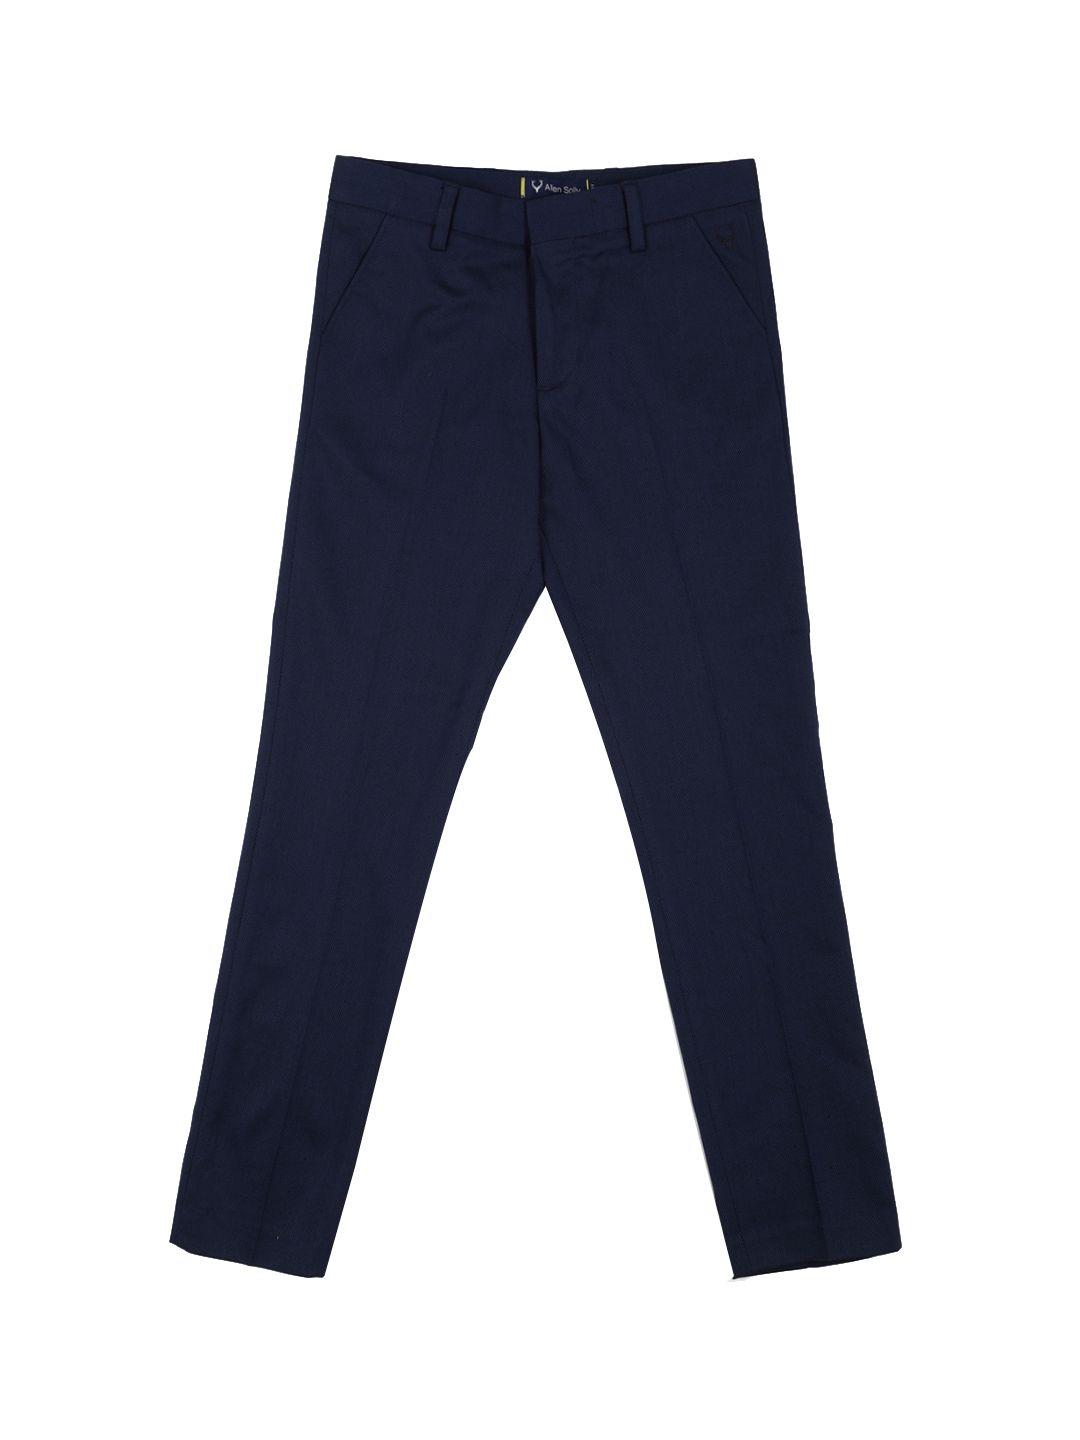 allen solly junior boys navy blue slim fit chinos trousers